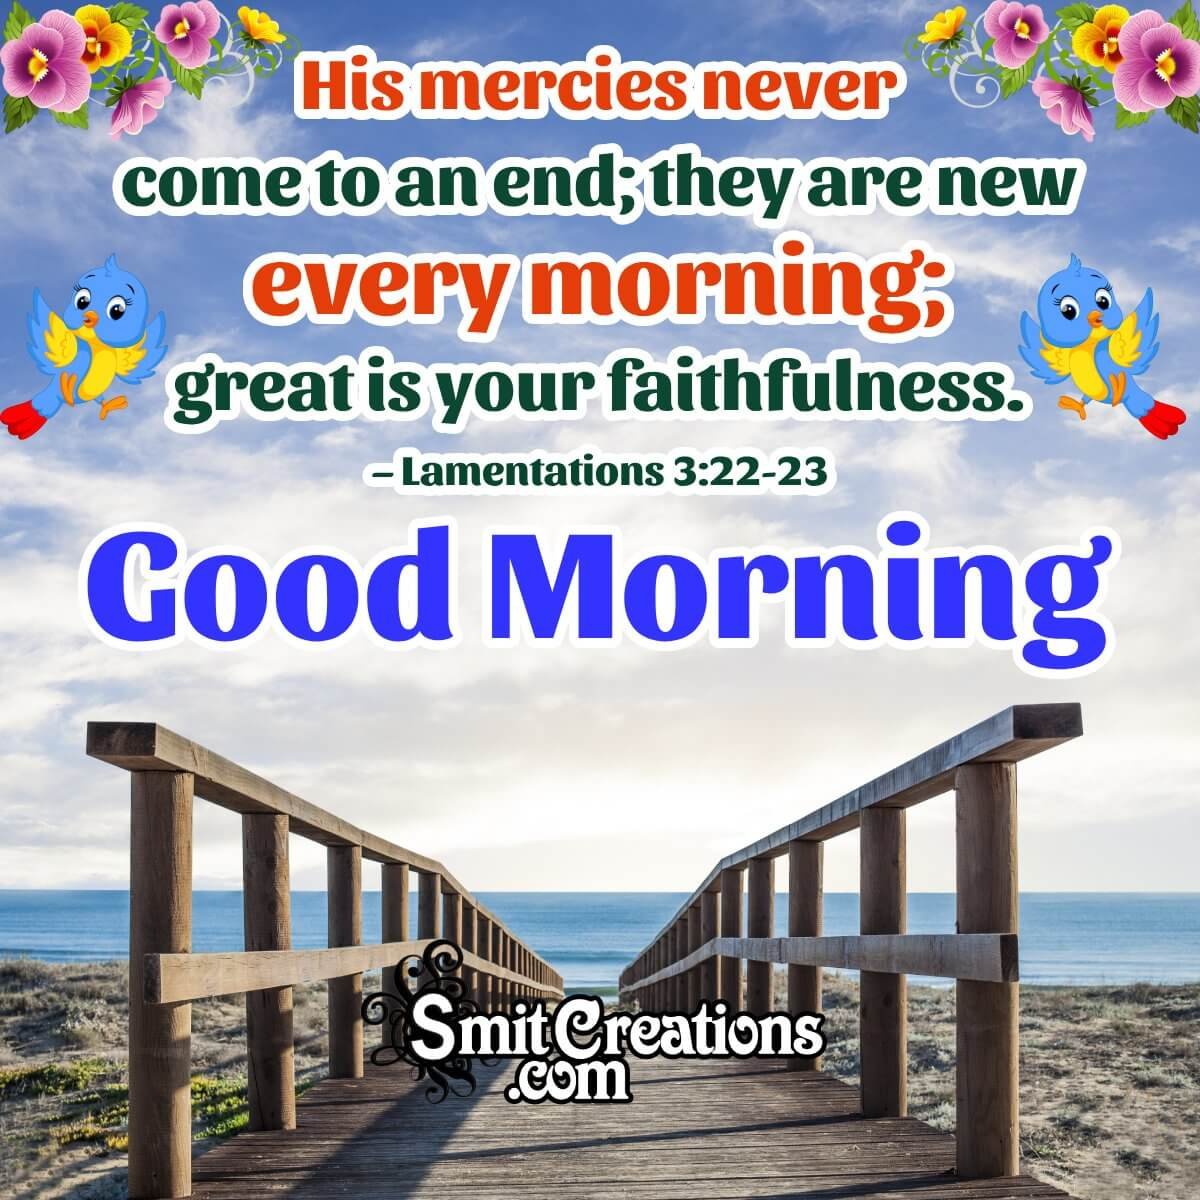 Good Morning Bible Verse Blessings Message Image